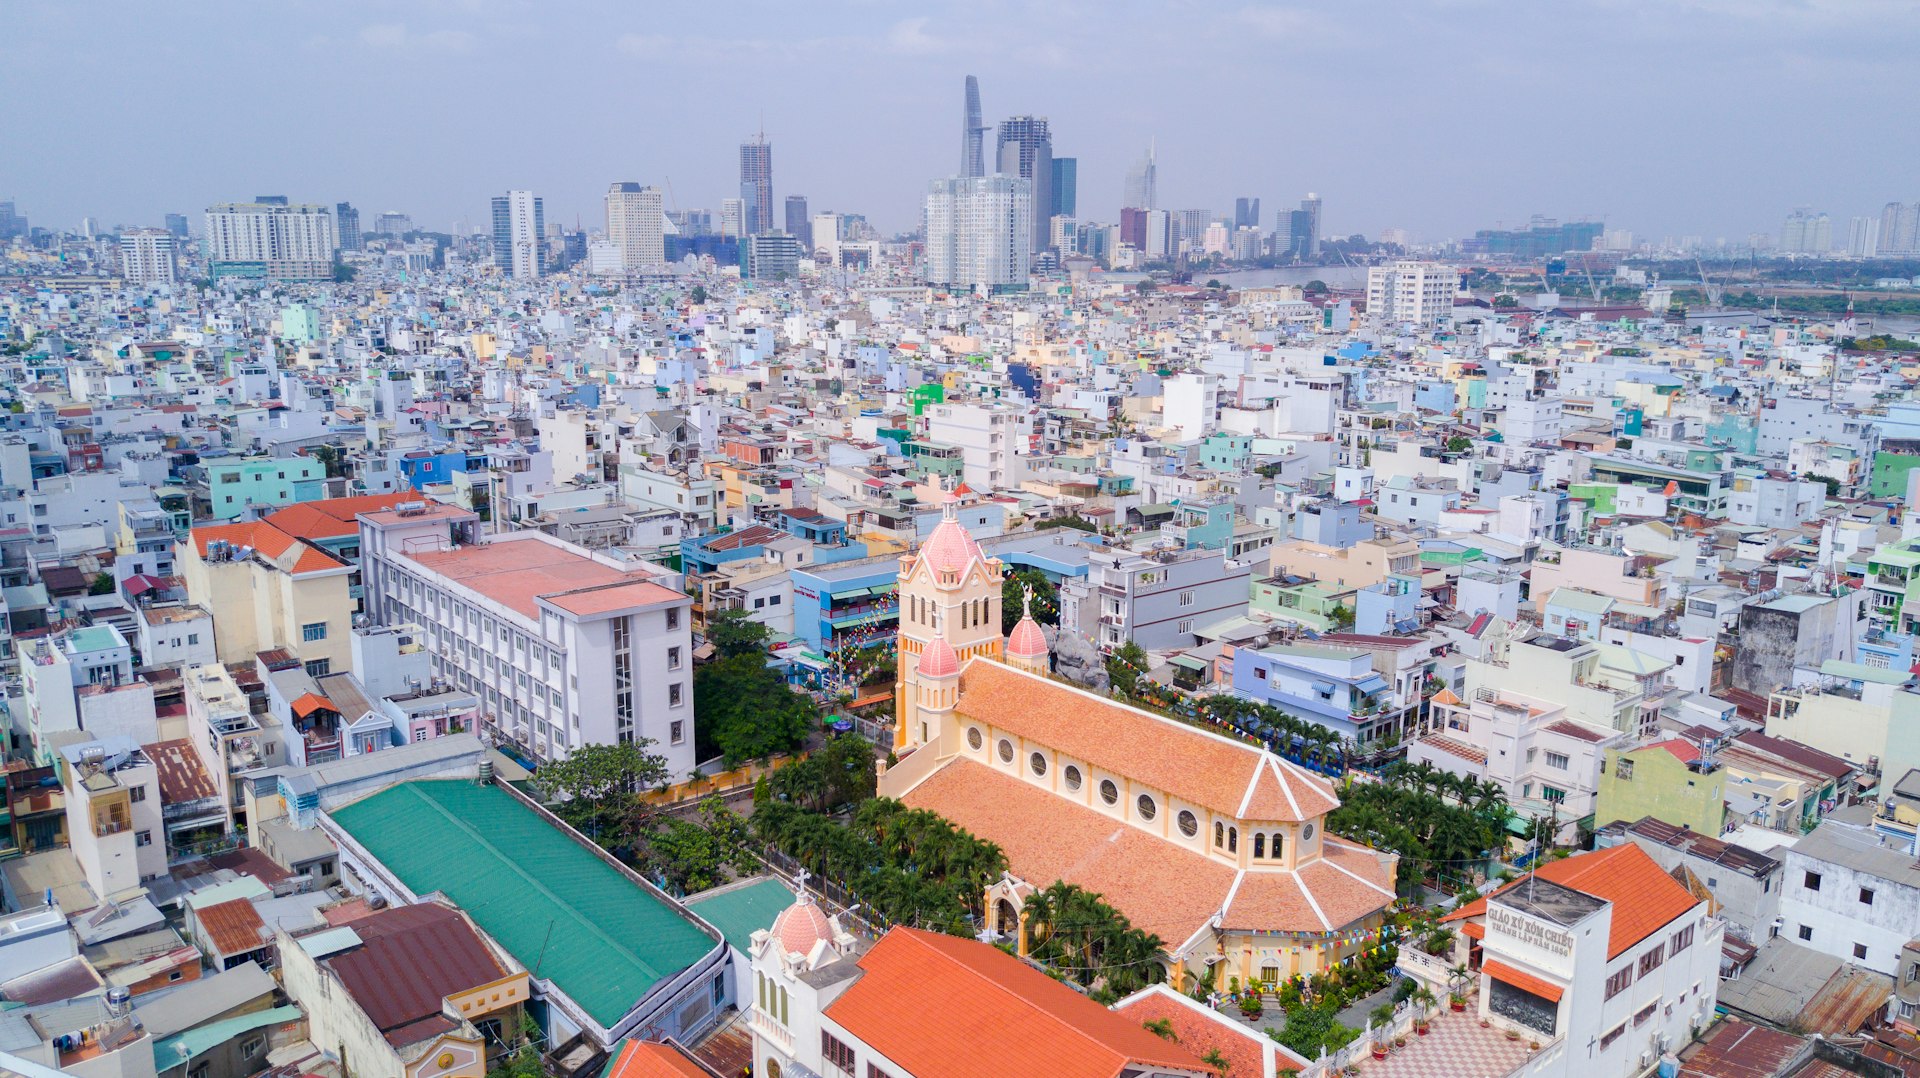 A birds eye view of residential section of Ho Chi Minh City © Gabriel Rovick / Lonely Planet